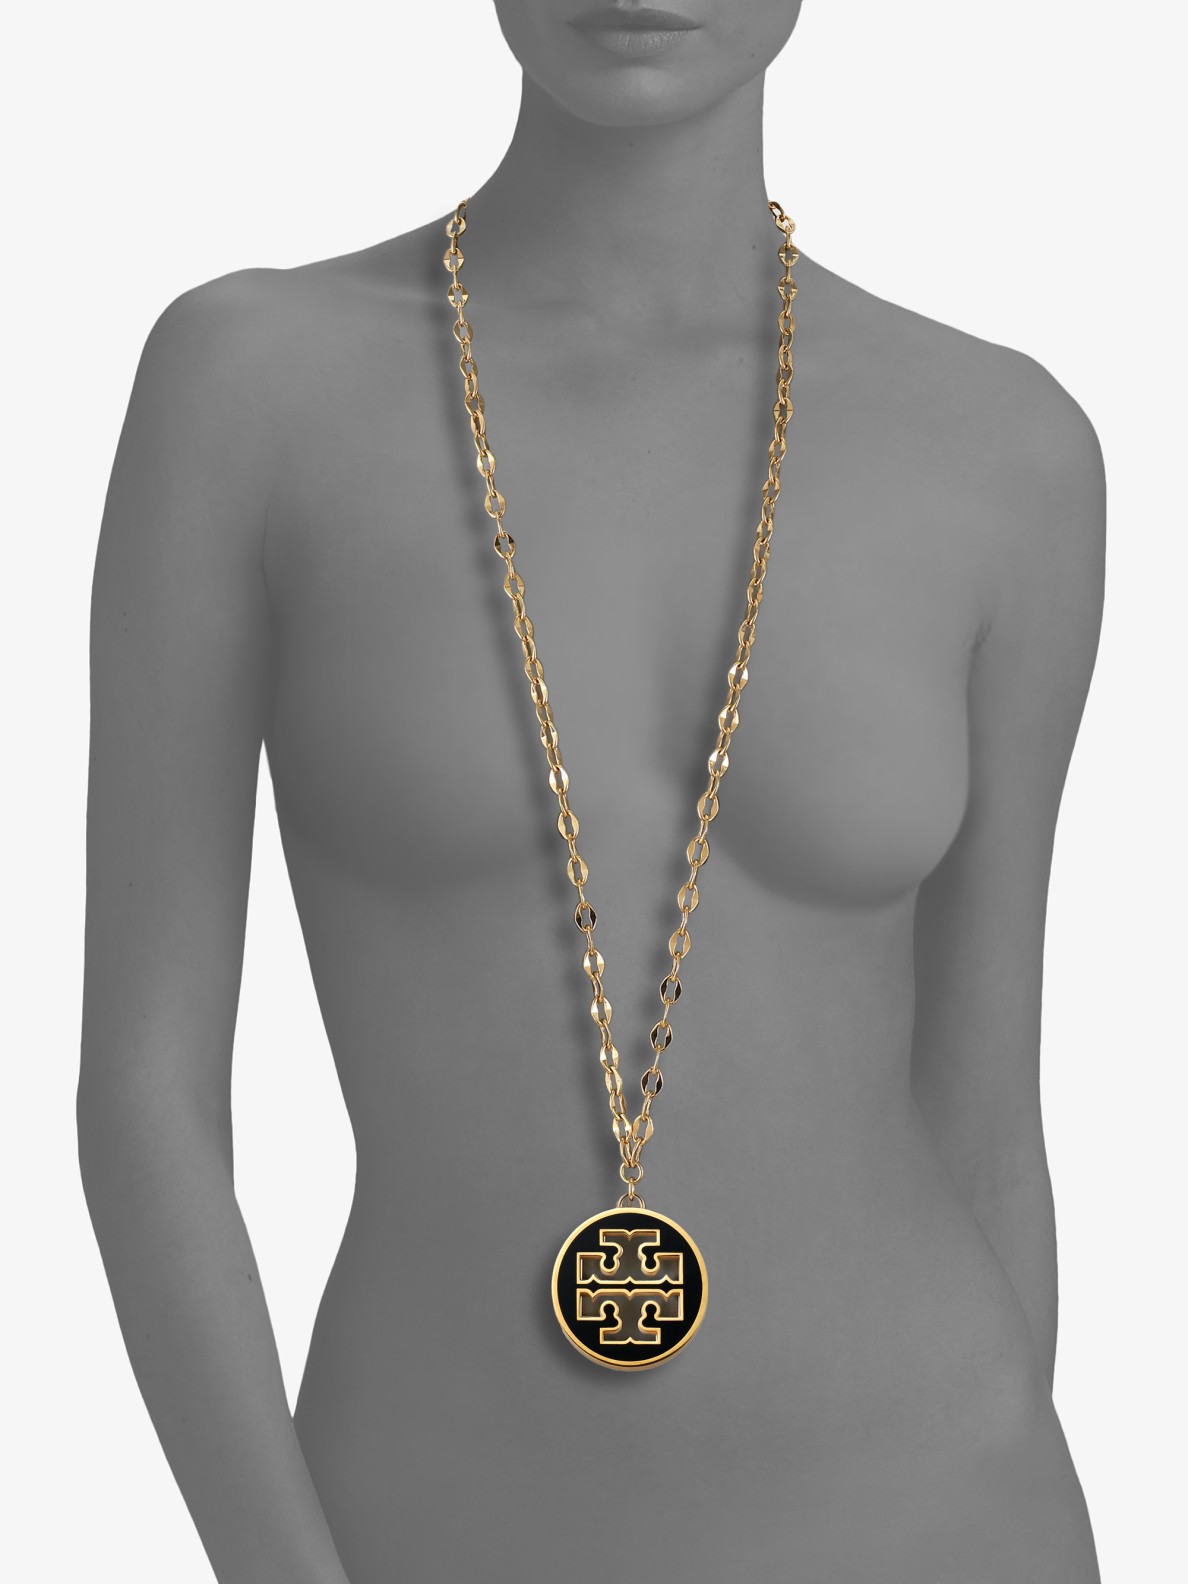 Tory Burch - Our Surreal Lock Pendant Necklace An edgy